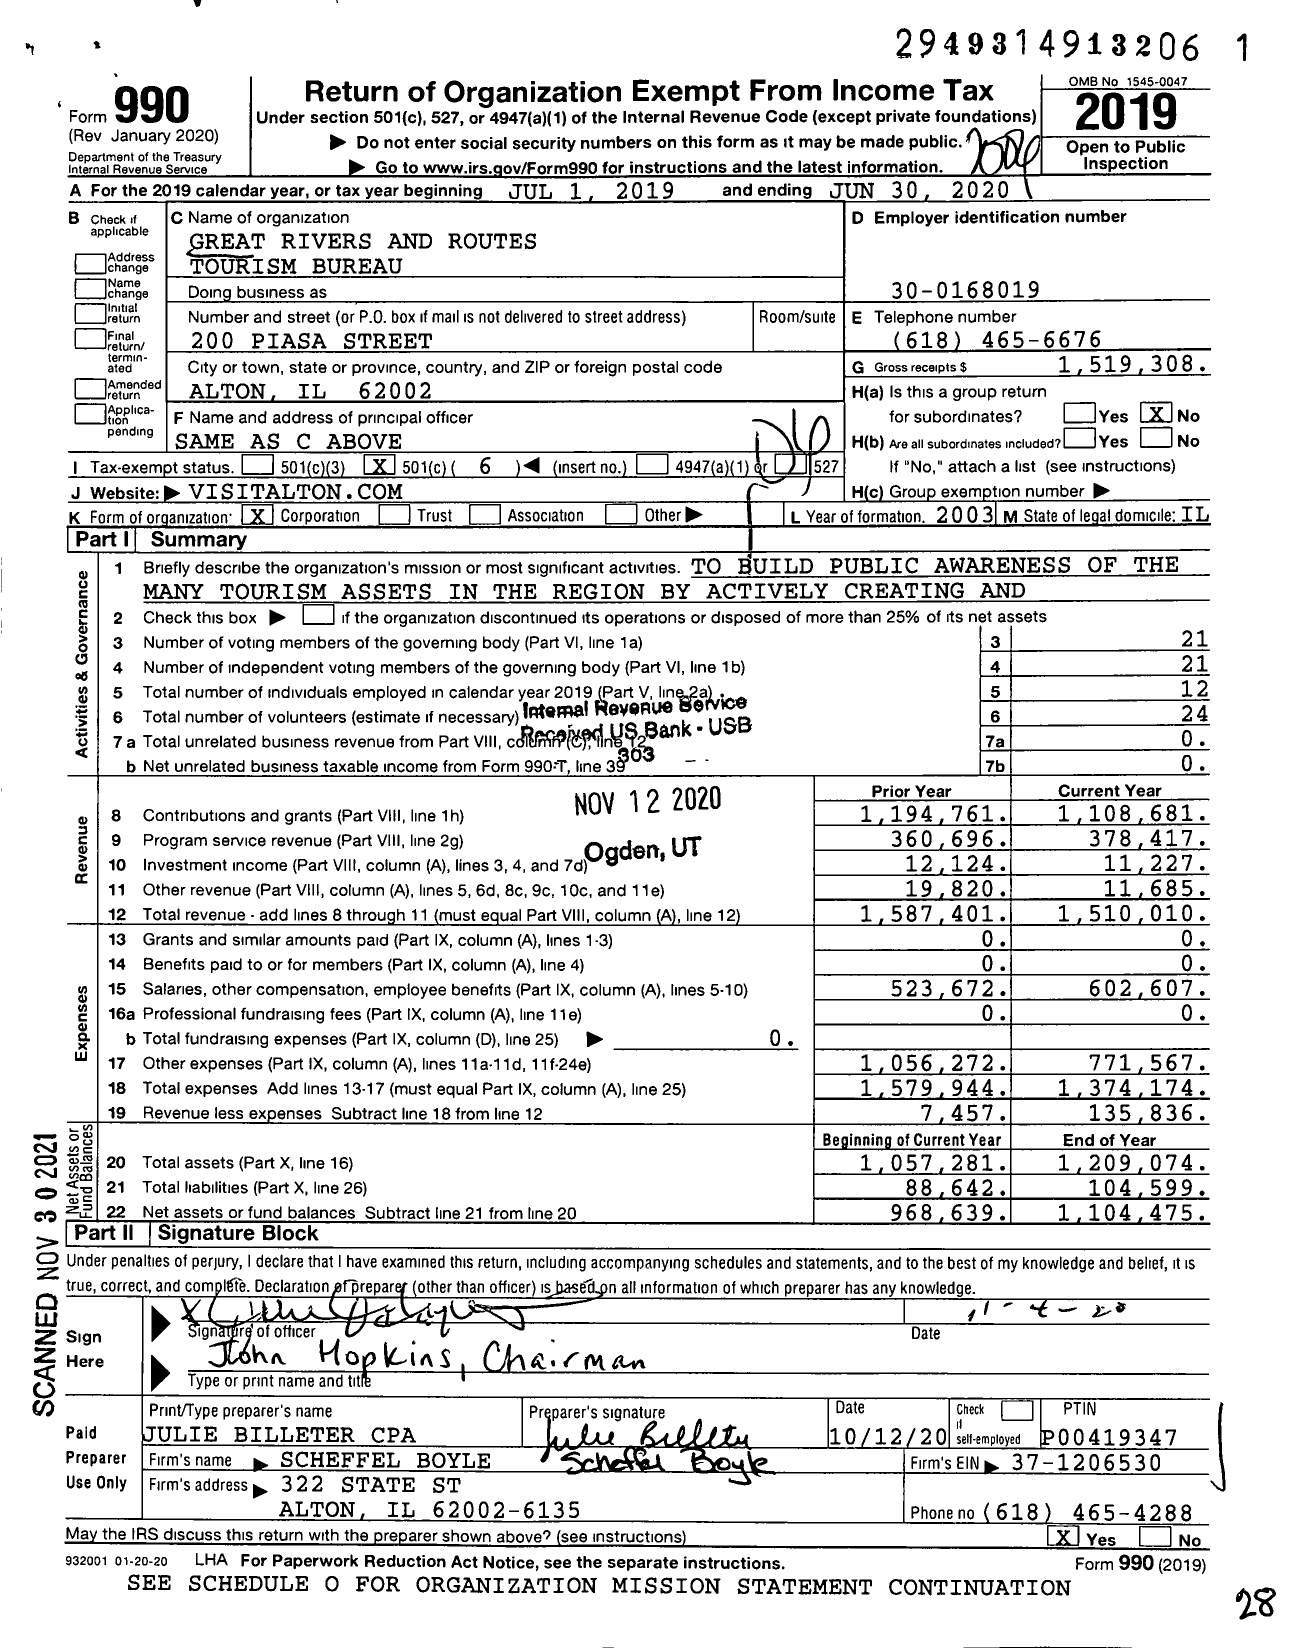 Image of first page of 2019 Form 990O for Great Rivers and Routes Tourism Bureau